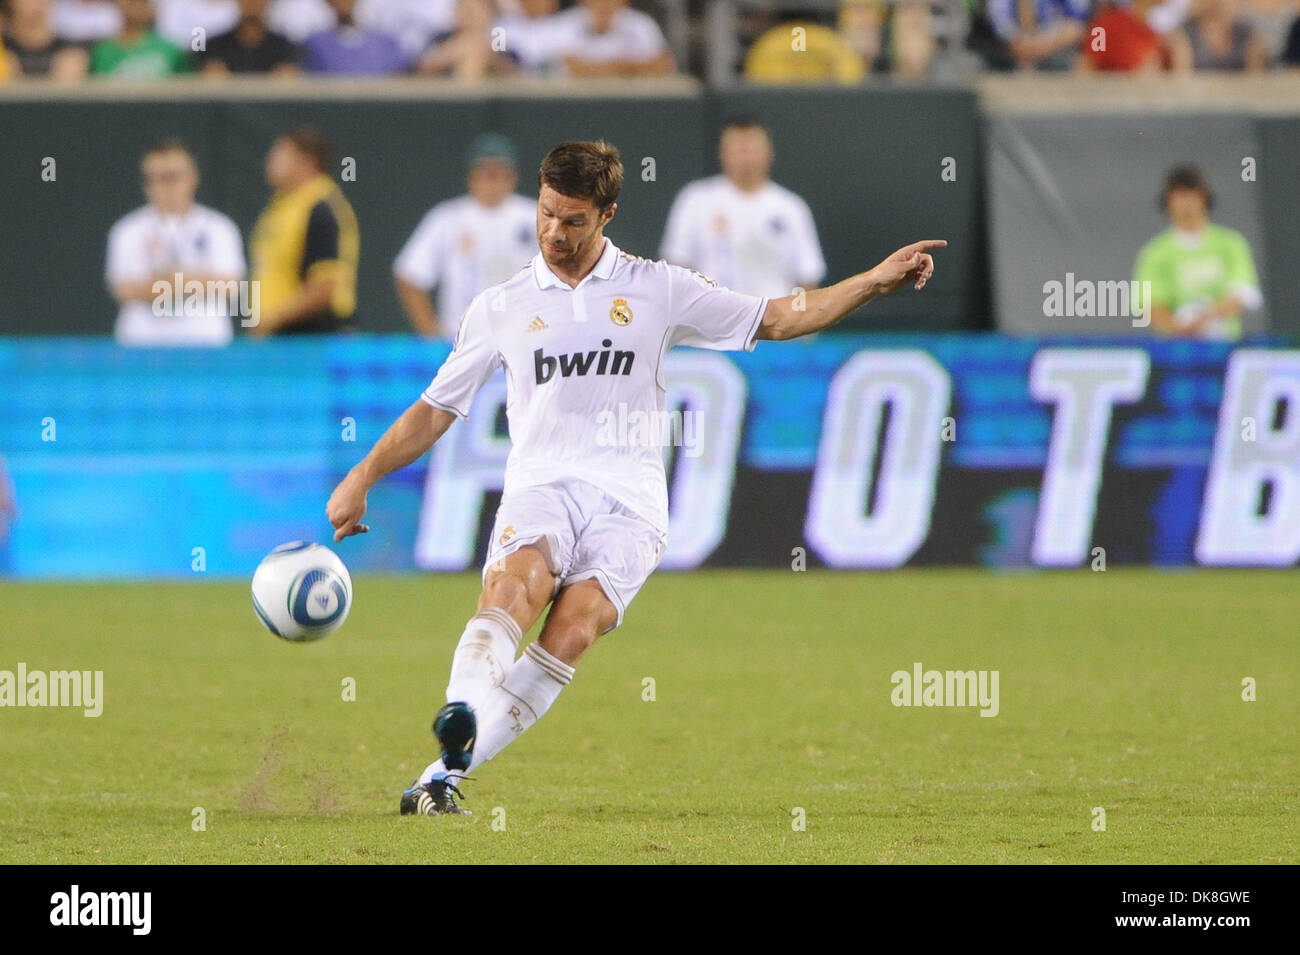 July 23, 2011 - Philadelphia, Pennsylvania, U.S - Real Madrid midfielder Xabi Alonso (14) with the ball. Real Madrid defeated the Philadelphia union 2-1, in a MLS friendly match, part of the World Football Challenge. Being played at Lincoln Financial Field in Philadelphia , Pennsylvania (Credit Image: © Mike McAtee/Southcreek Global/ZUMAPRESS.com) Stock Photo